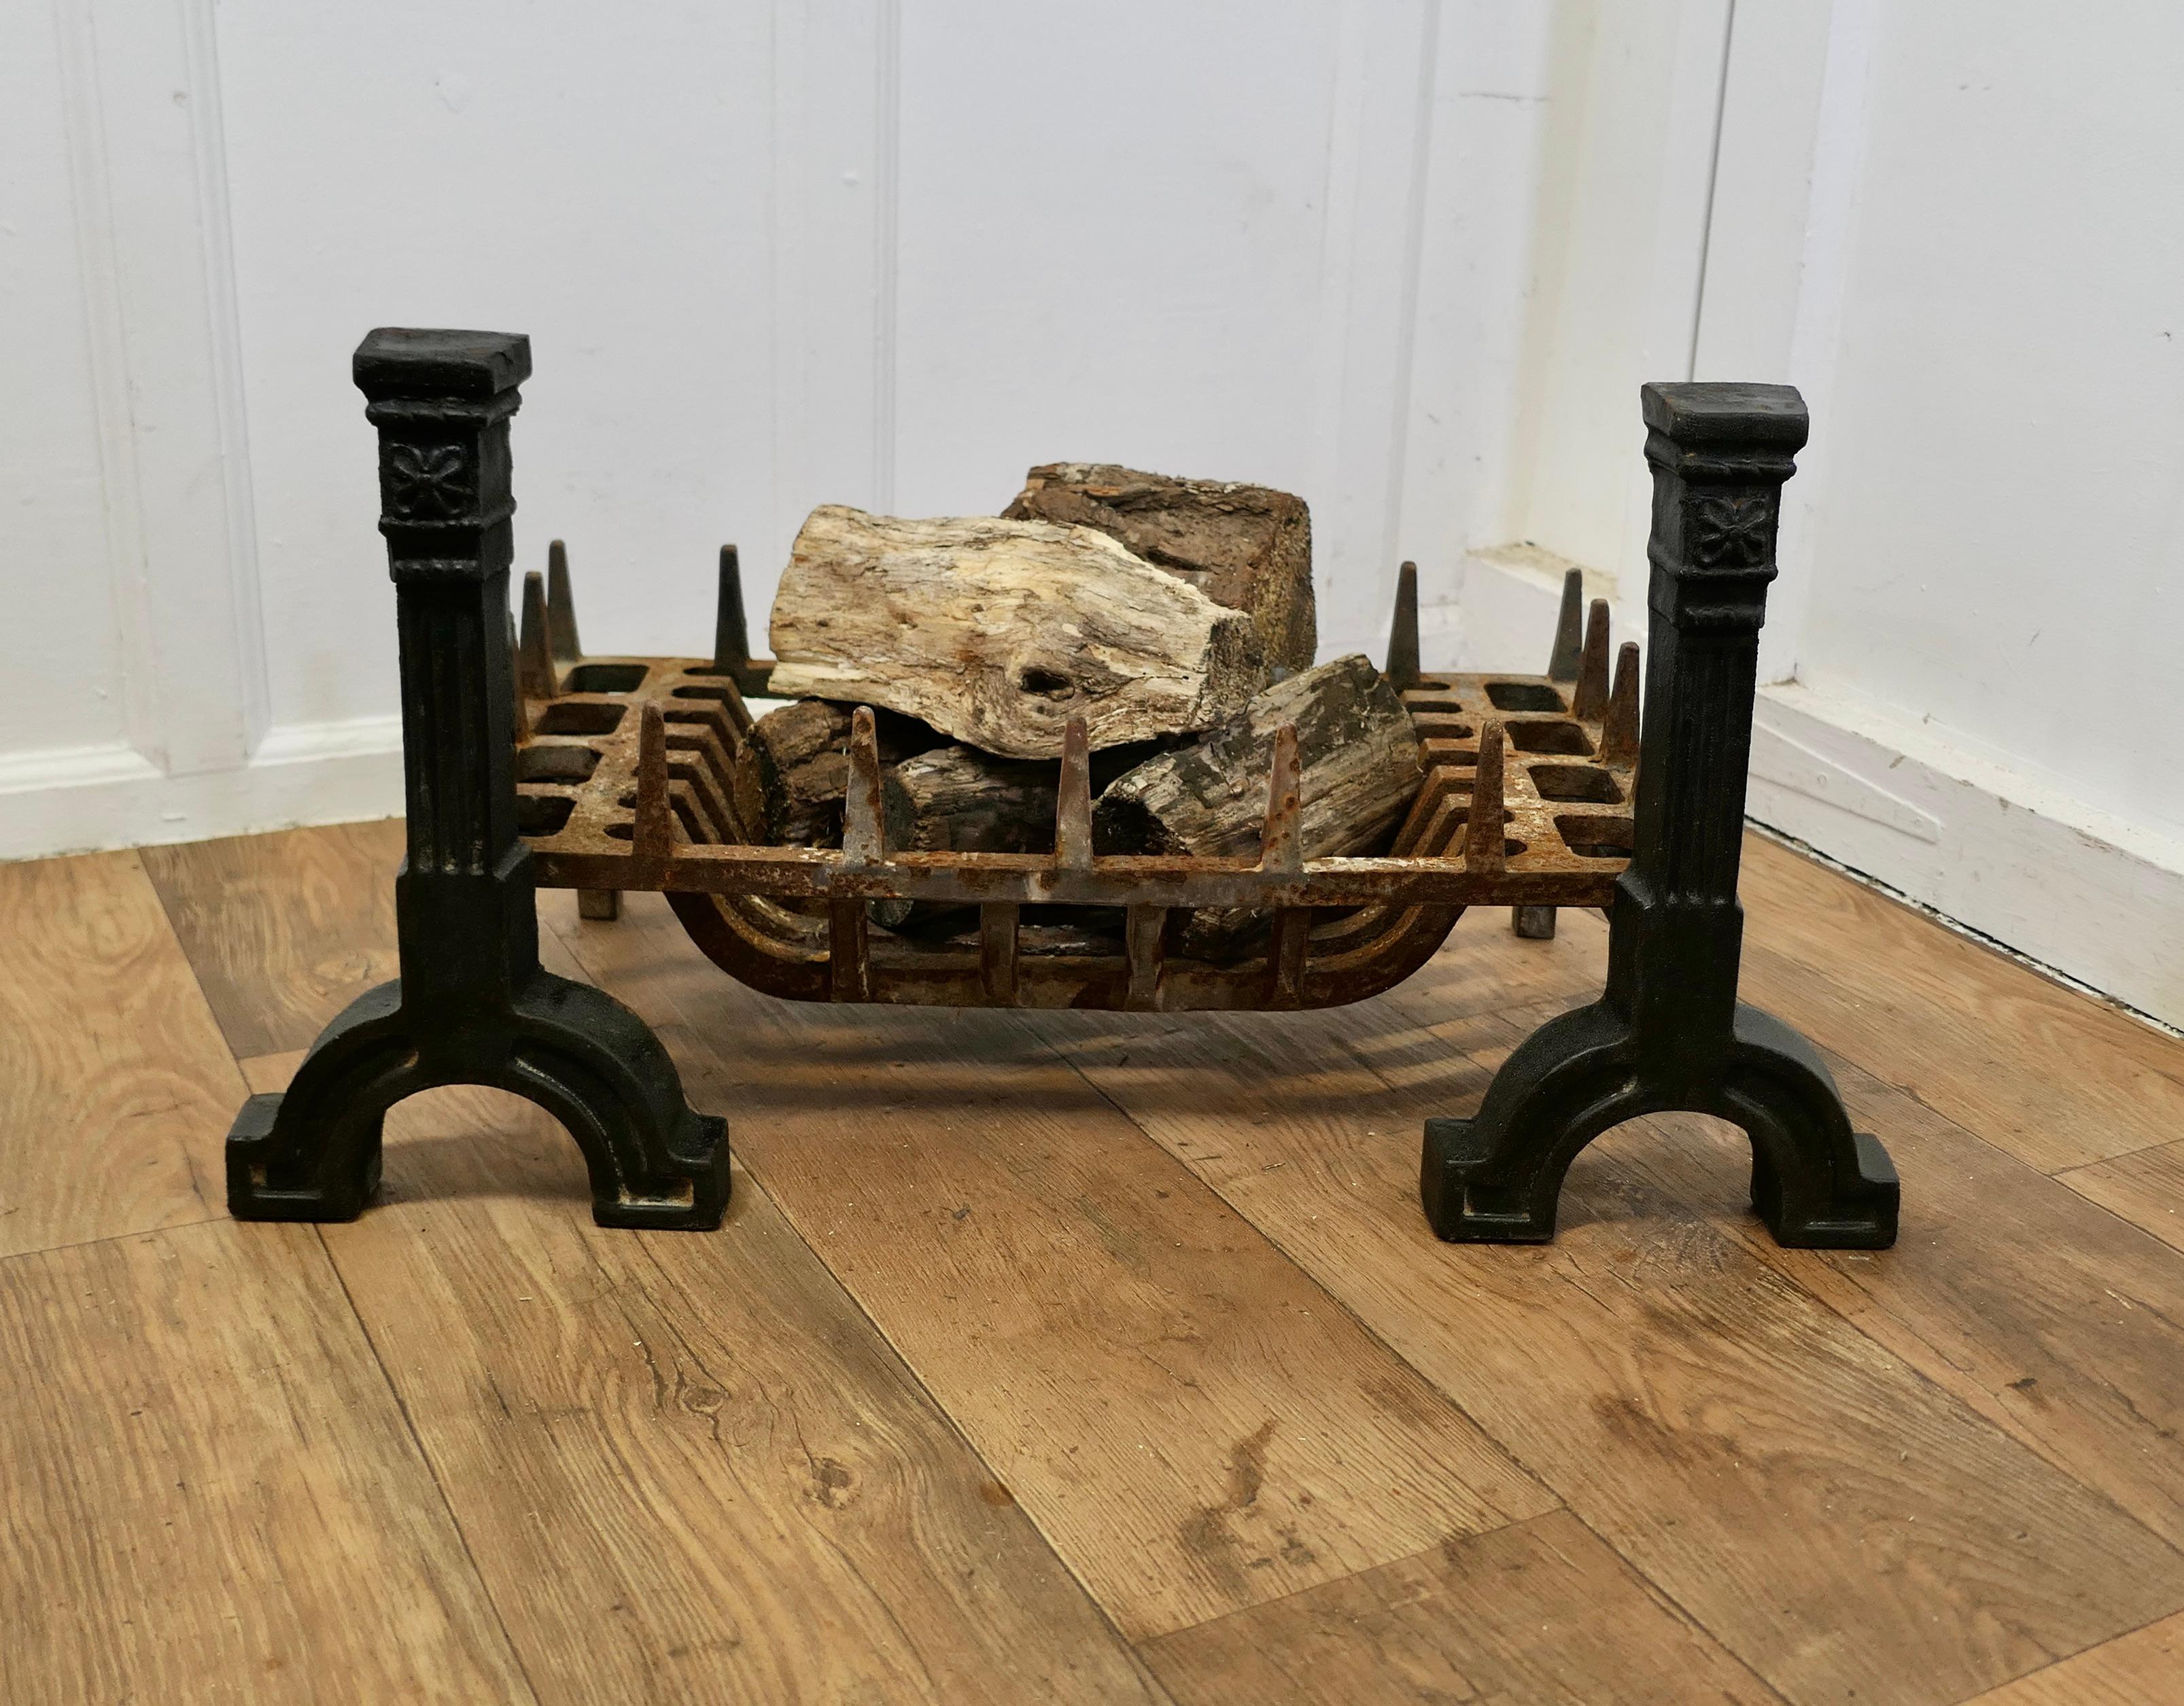 Large 19th Century Inglenook Fire Grate on Andirons

This is heavy hand Forged Iron Log Grate is supported on a Pair of Iron Andirons
The Grate is in very good but used condition and it is very heavy and would look superb in an open or Inglenook